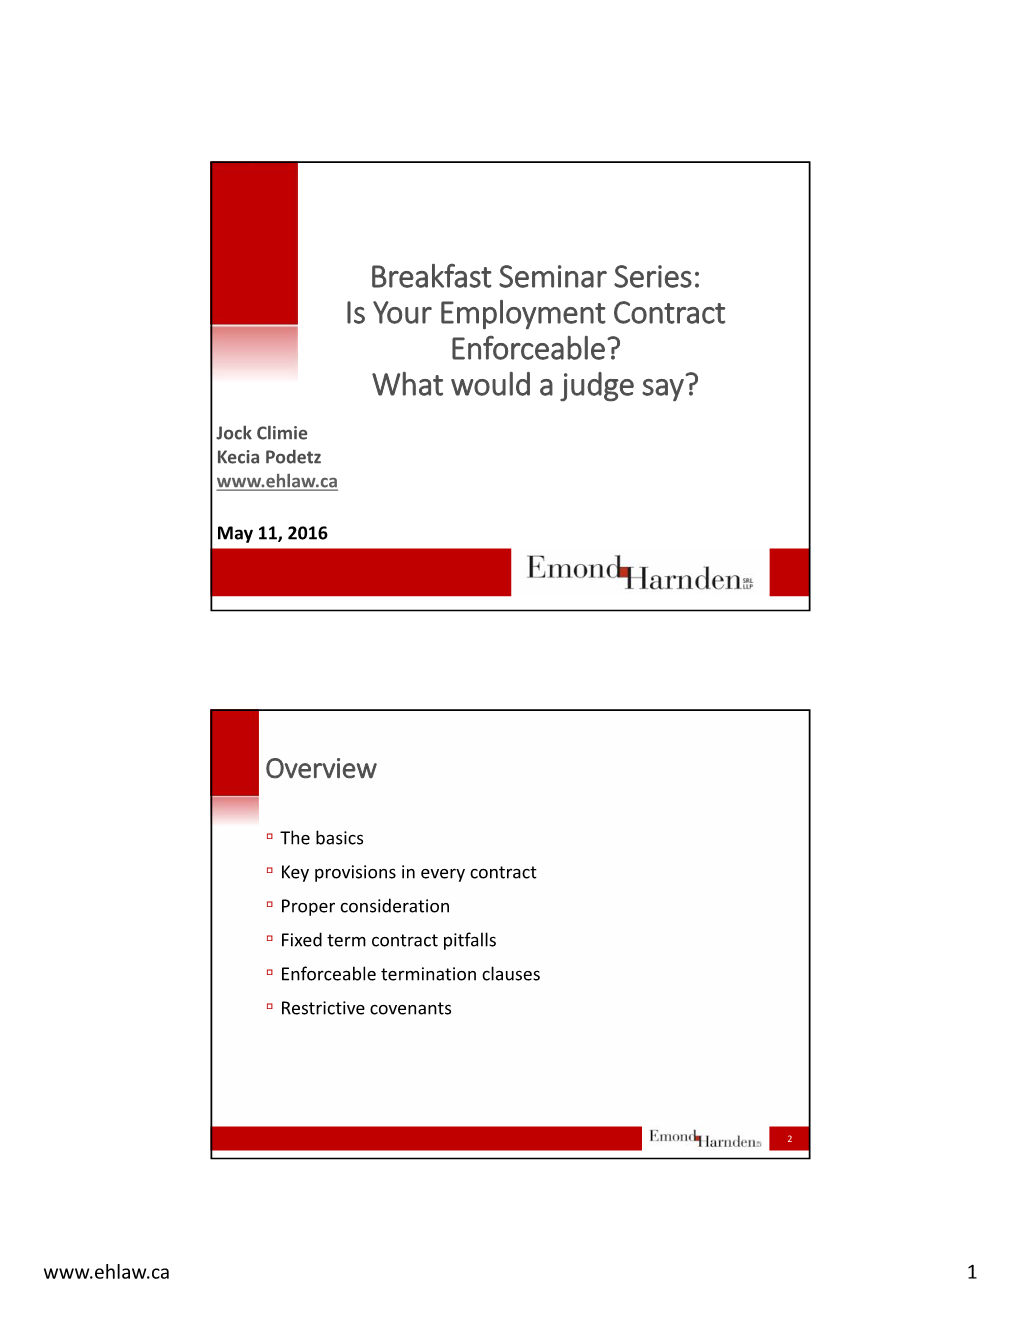 Breakfast Seminar Series: Is Your Employment Contract Enforceable? What Would a Judge Say?